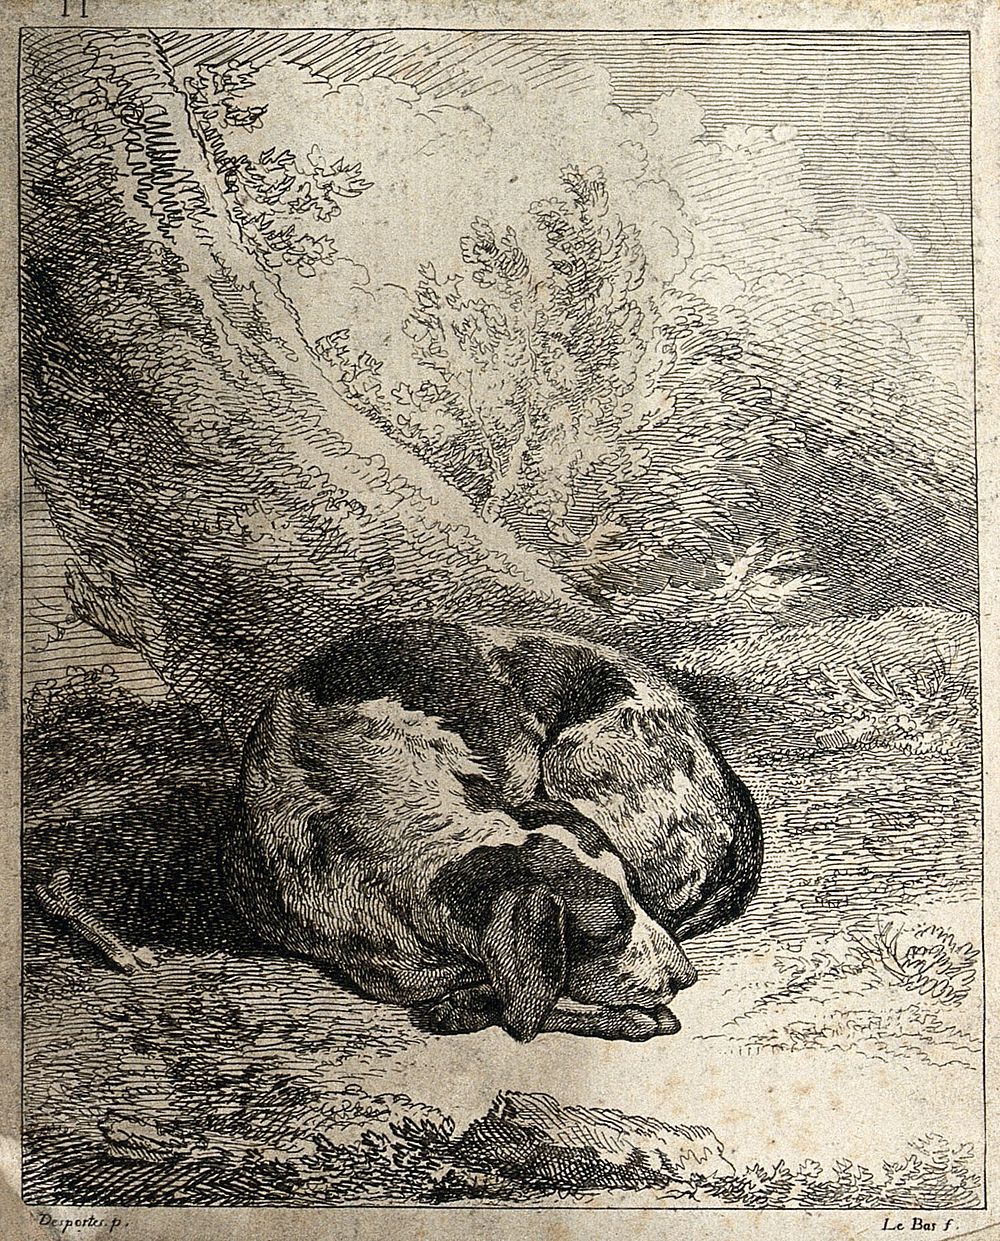 A dog curled up and asleep under a tree. Etching by J.P. Le Bas after A.F. Desportes.